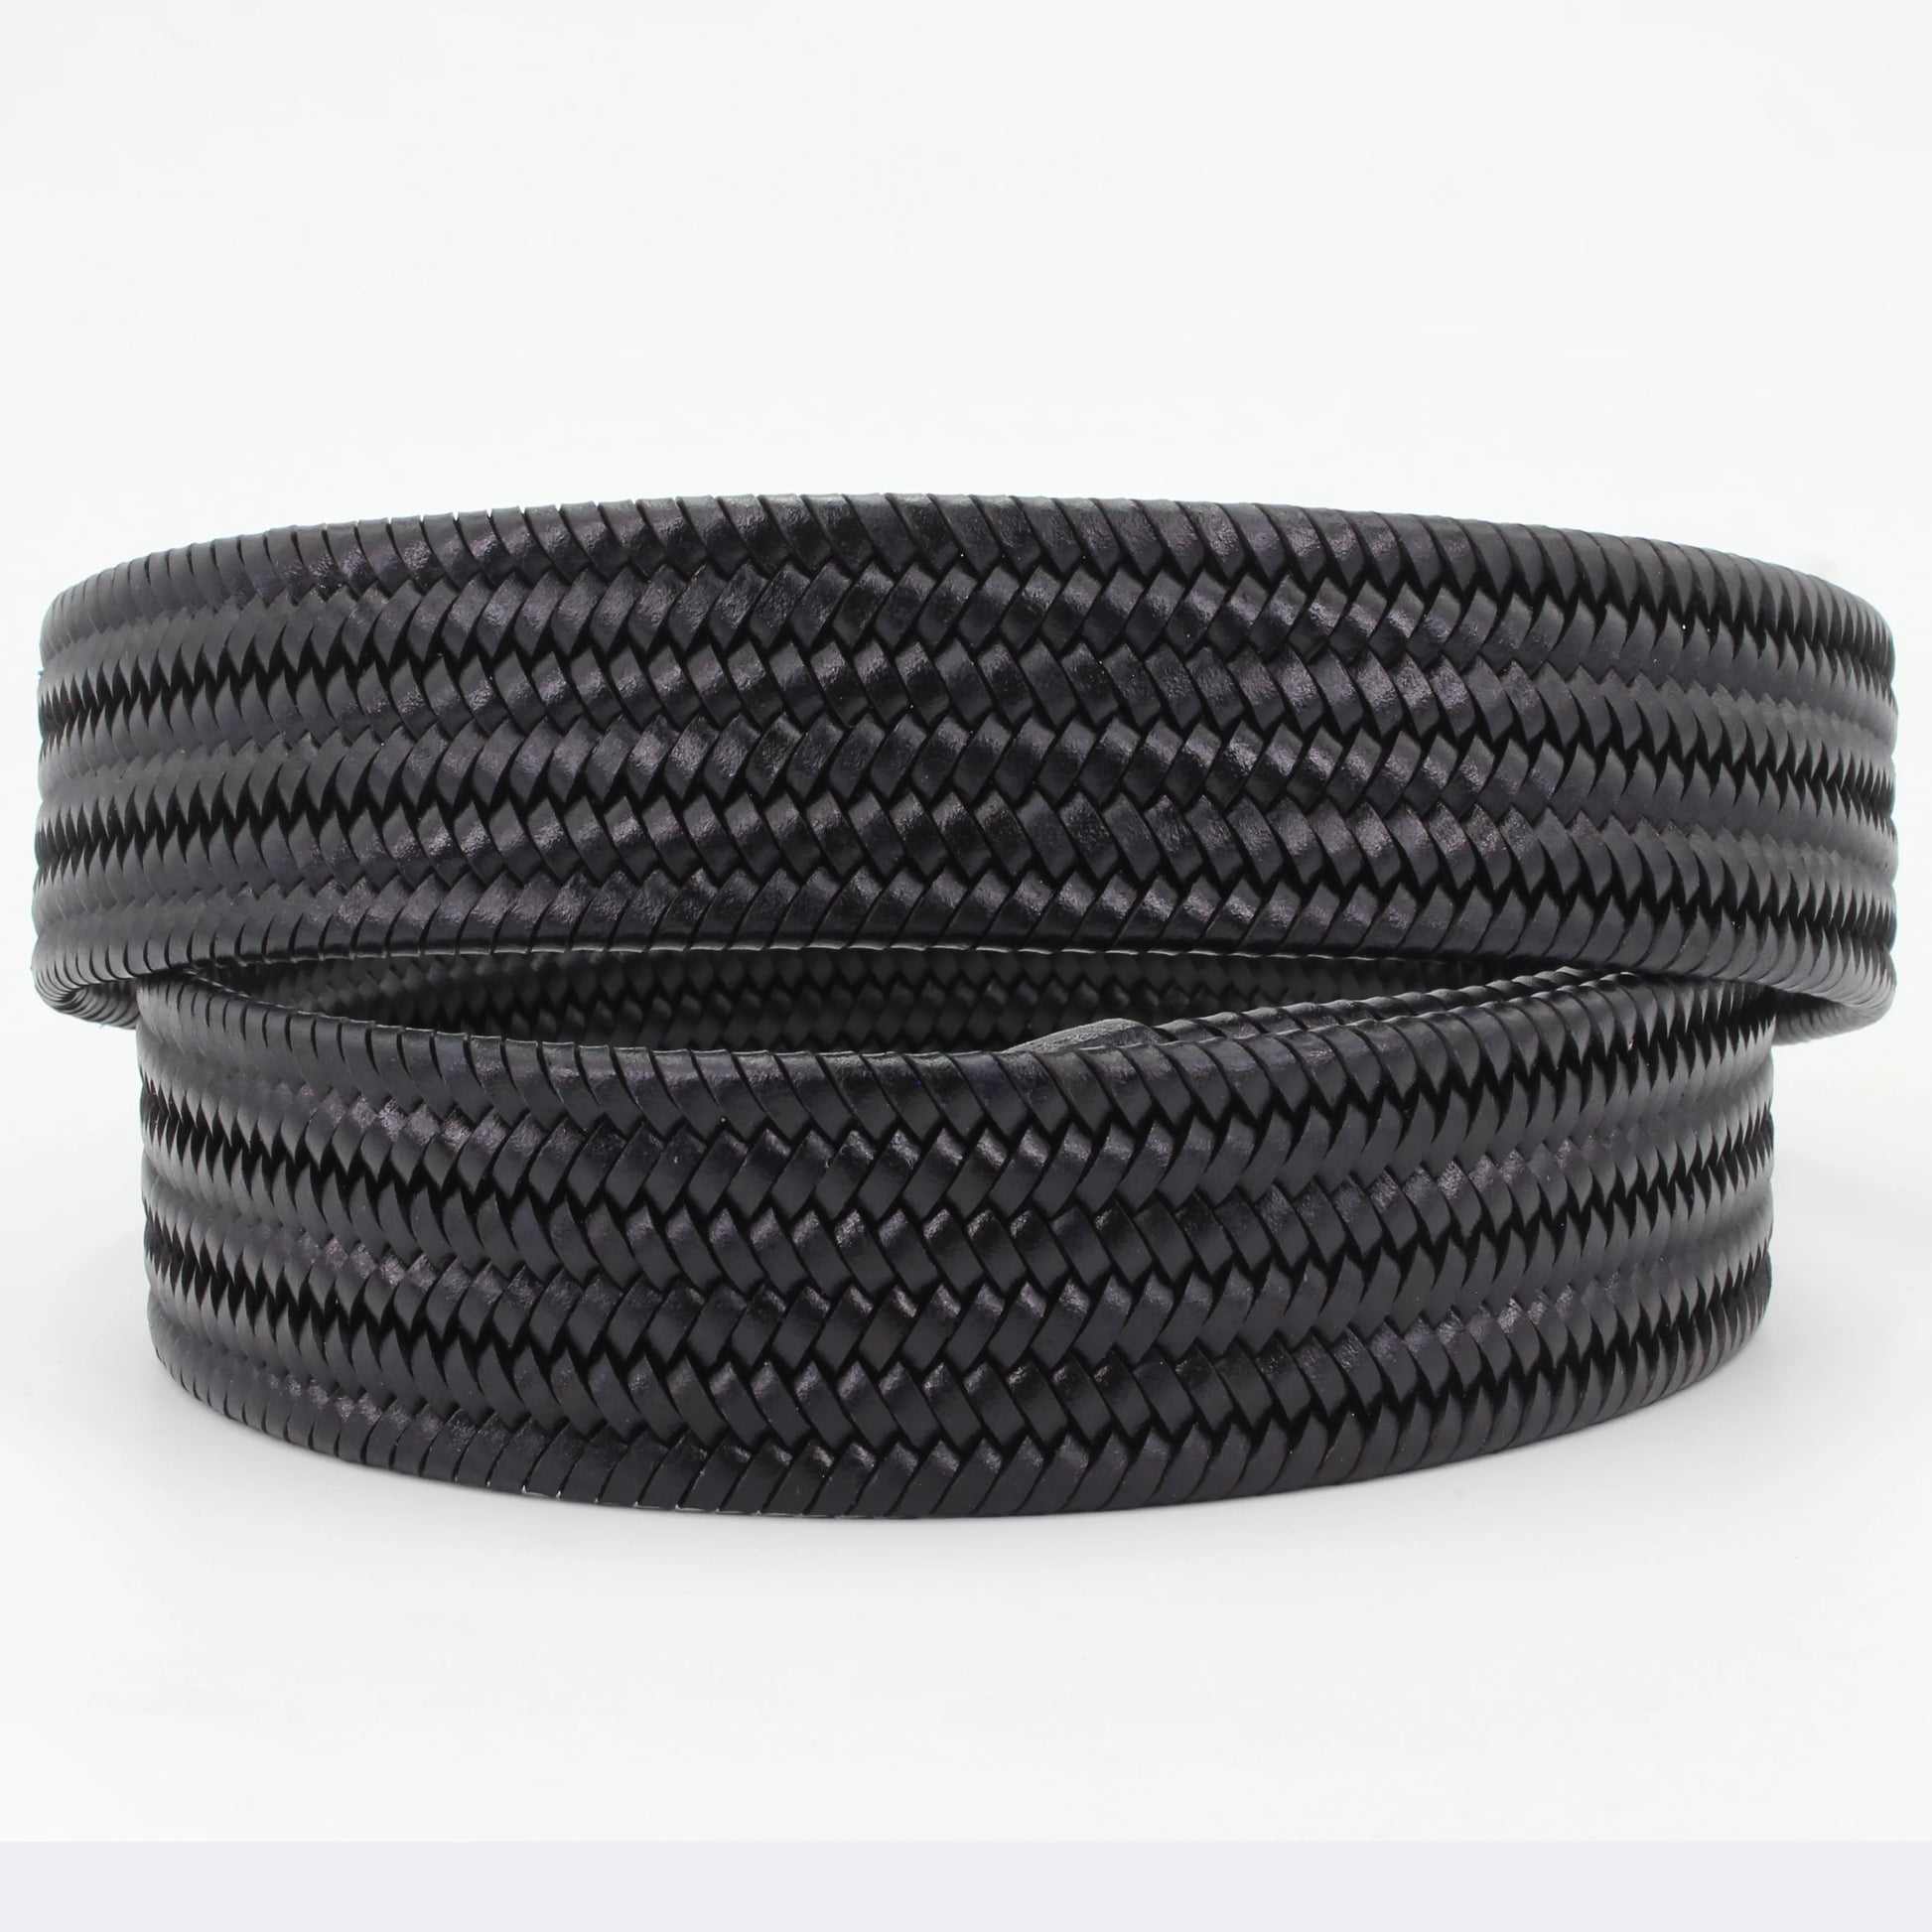 Shop our Italian-made Cuoieria Fiorentina woven leather belt in blu (C10DGEL00G000) or browse our range of Italian belts for men & women in-store at Aliverti Cape Town, or shop online.   We deliver in South Africa & offer multiple payment plans as well as accept multiple safe & secure payment methods.